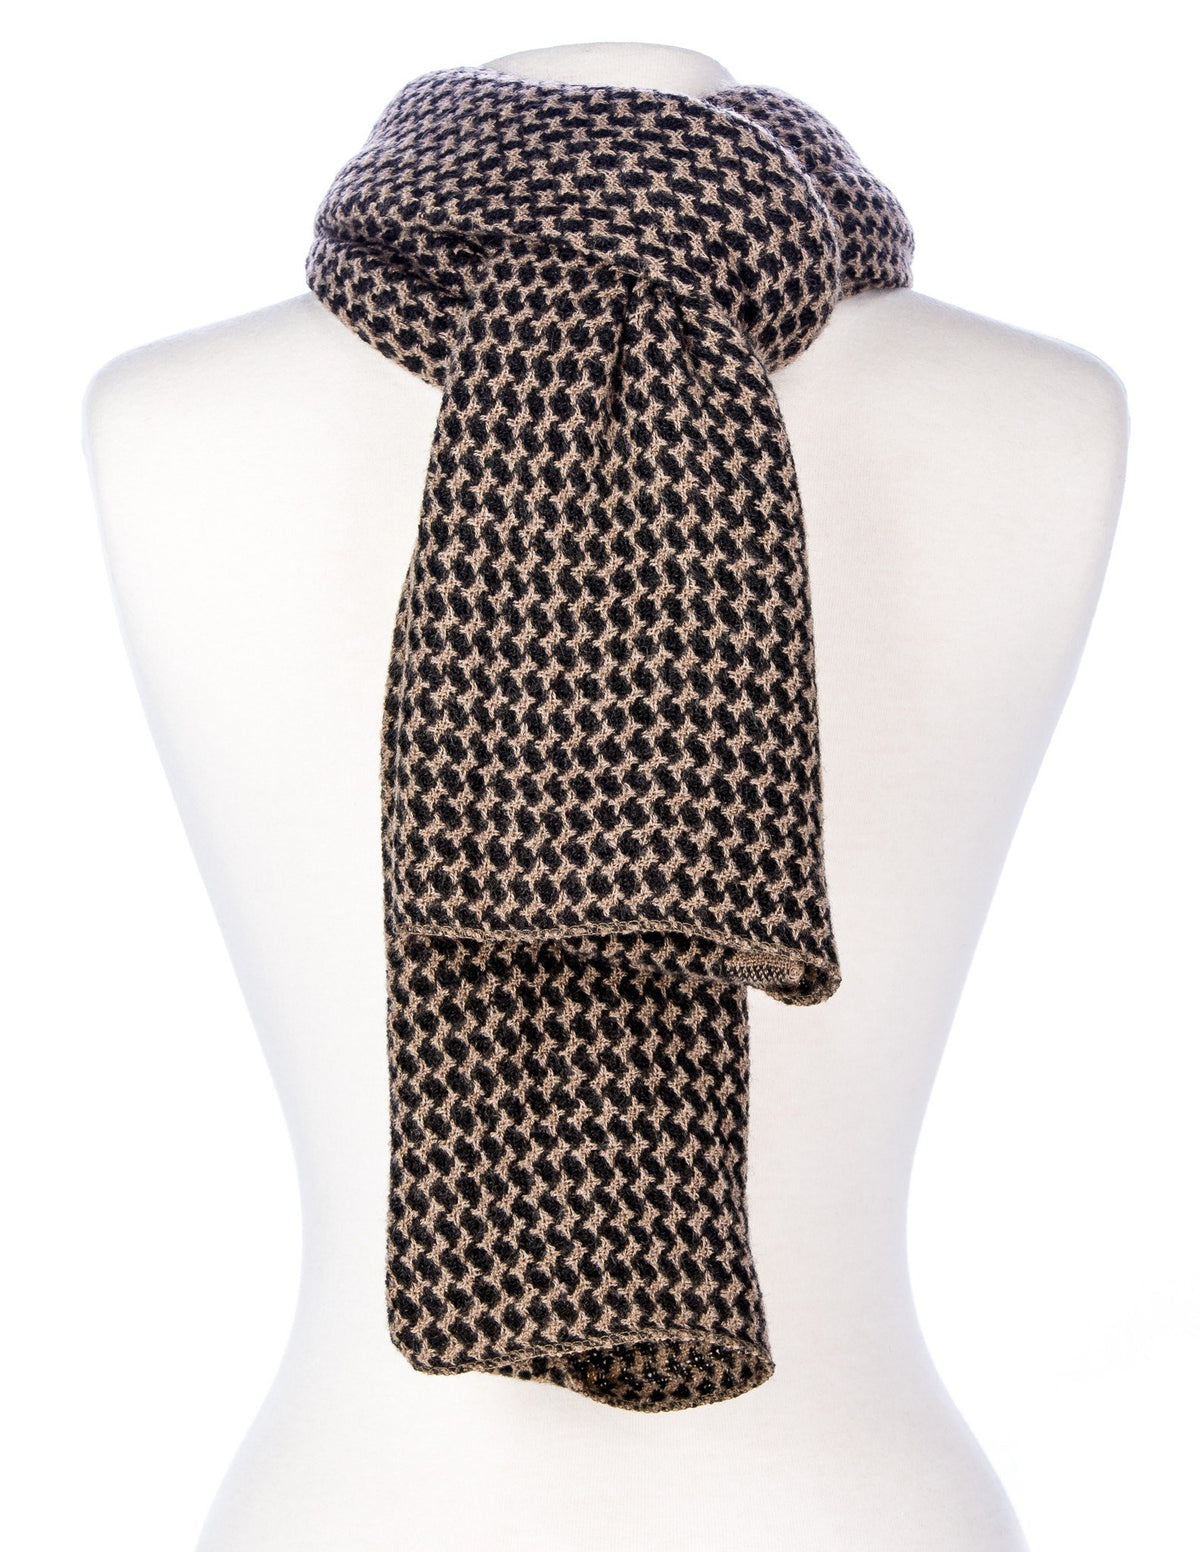 Men's Houndstooth Winter Scarf - Brown/Coffee